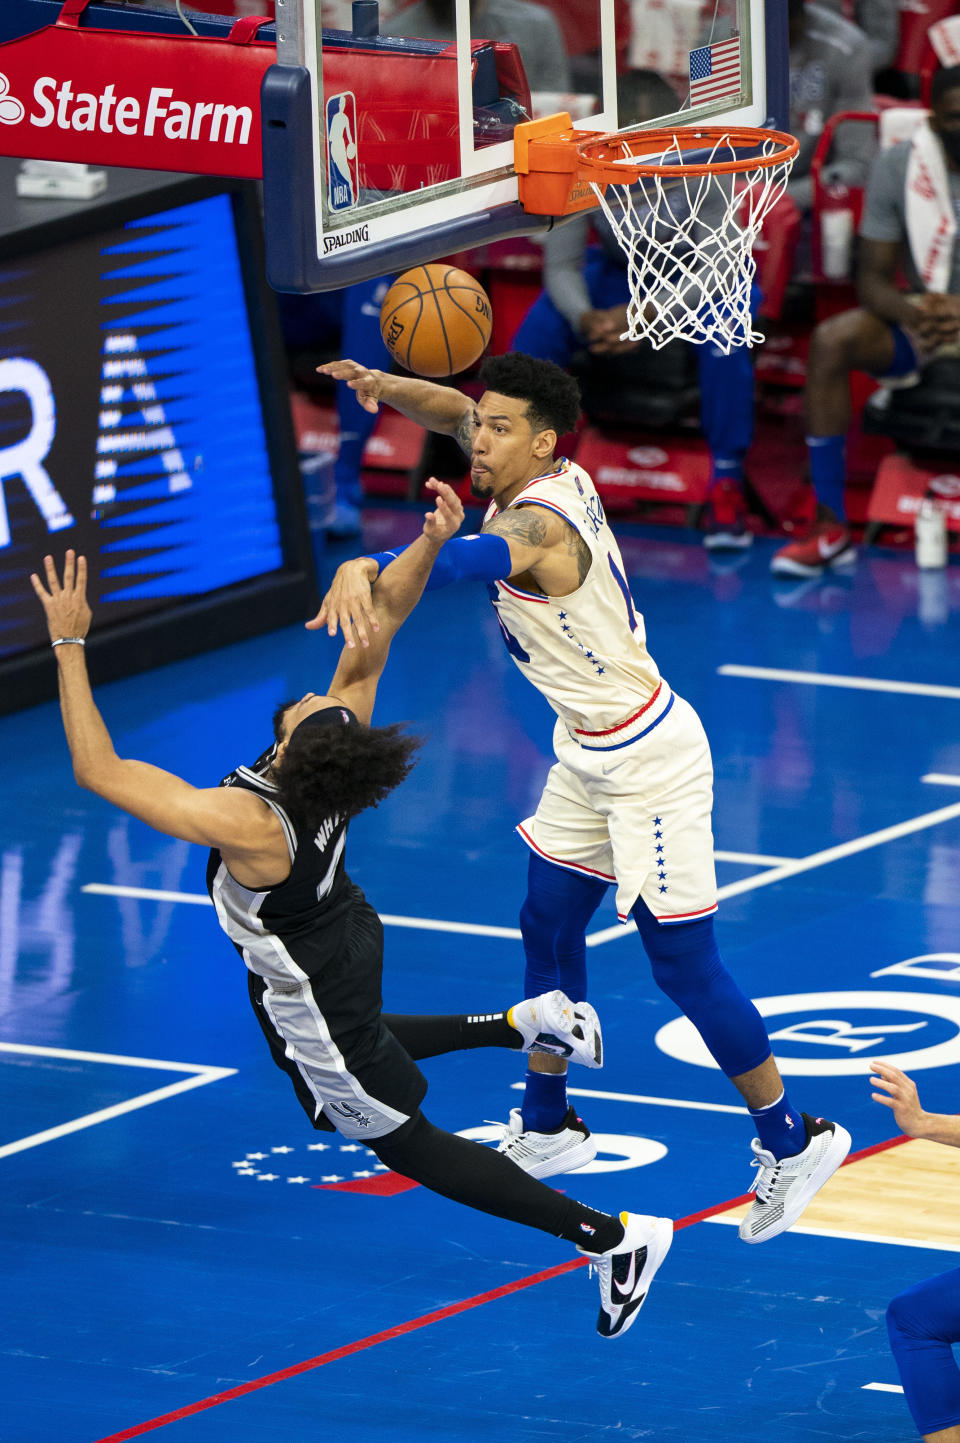 Philadelphia 76ers' Danny Green, right, defends against a shot by San Antonio Spurs' Derrick White, left, during the first half of an NBA basketball game, Sunday, March 14, 2021, in Philadelphia. (AP Photo/Chris Szagola)